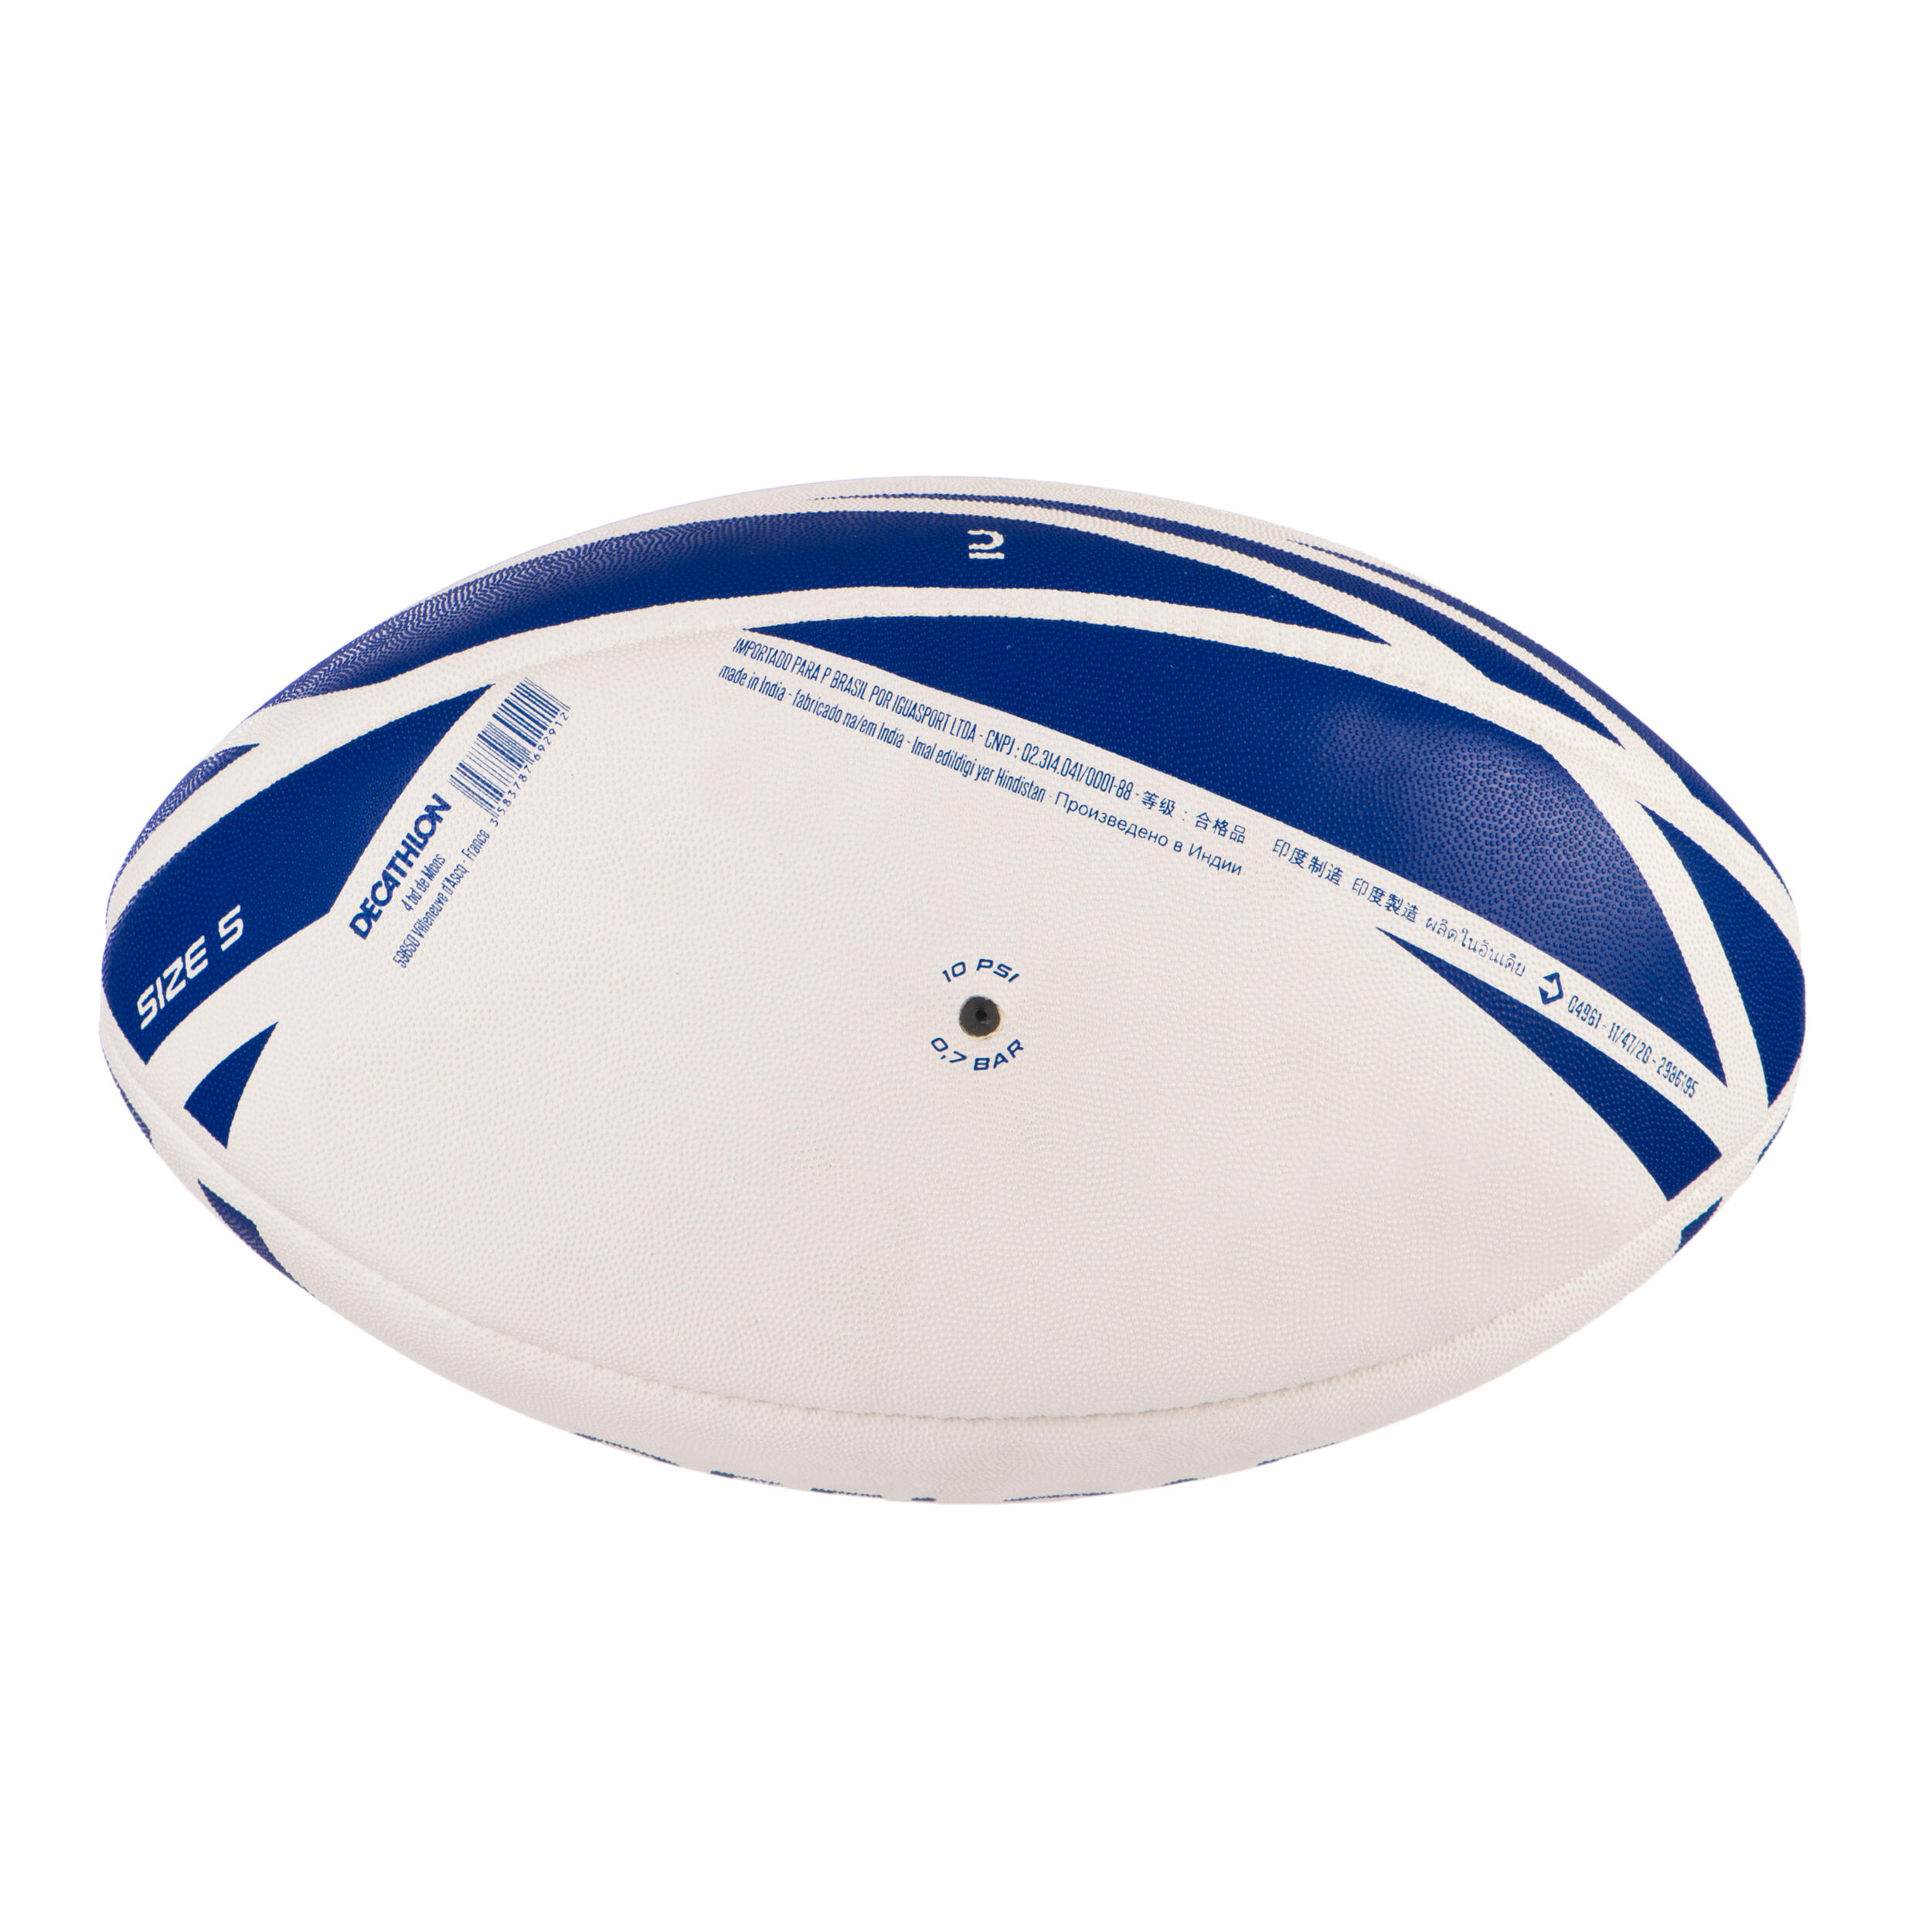 R100 rugby training ball size 5 - OFFLOAD